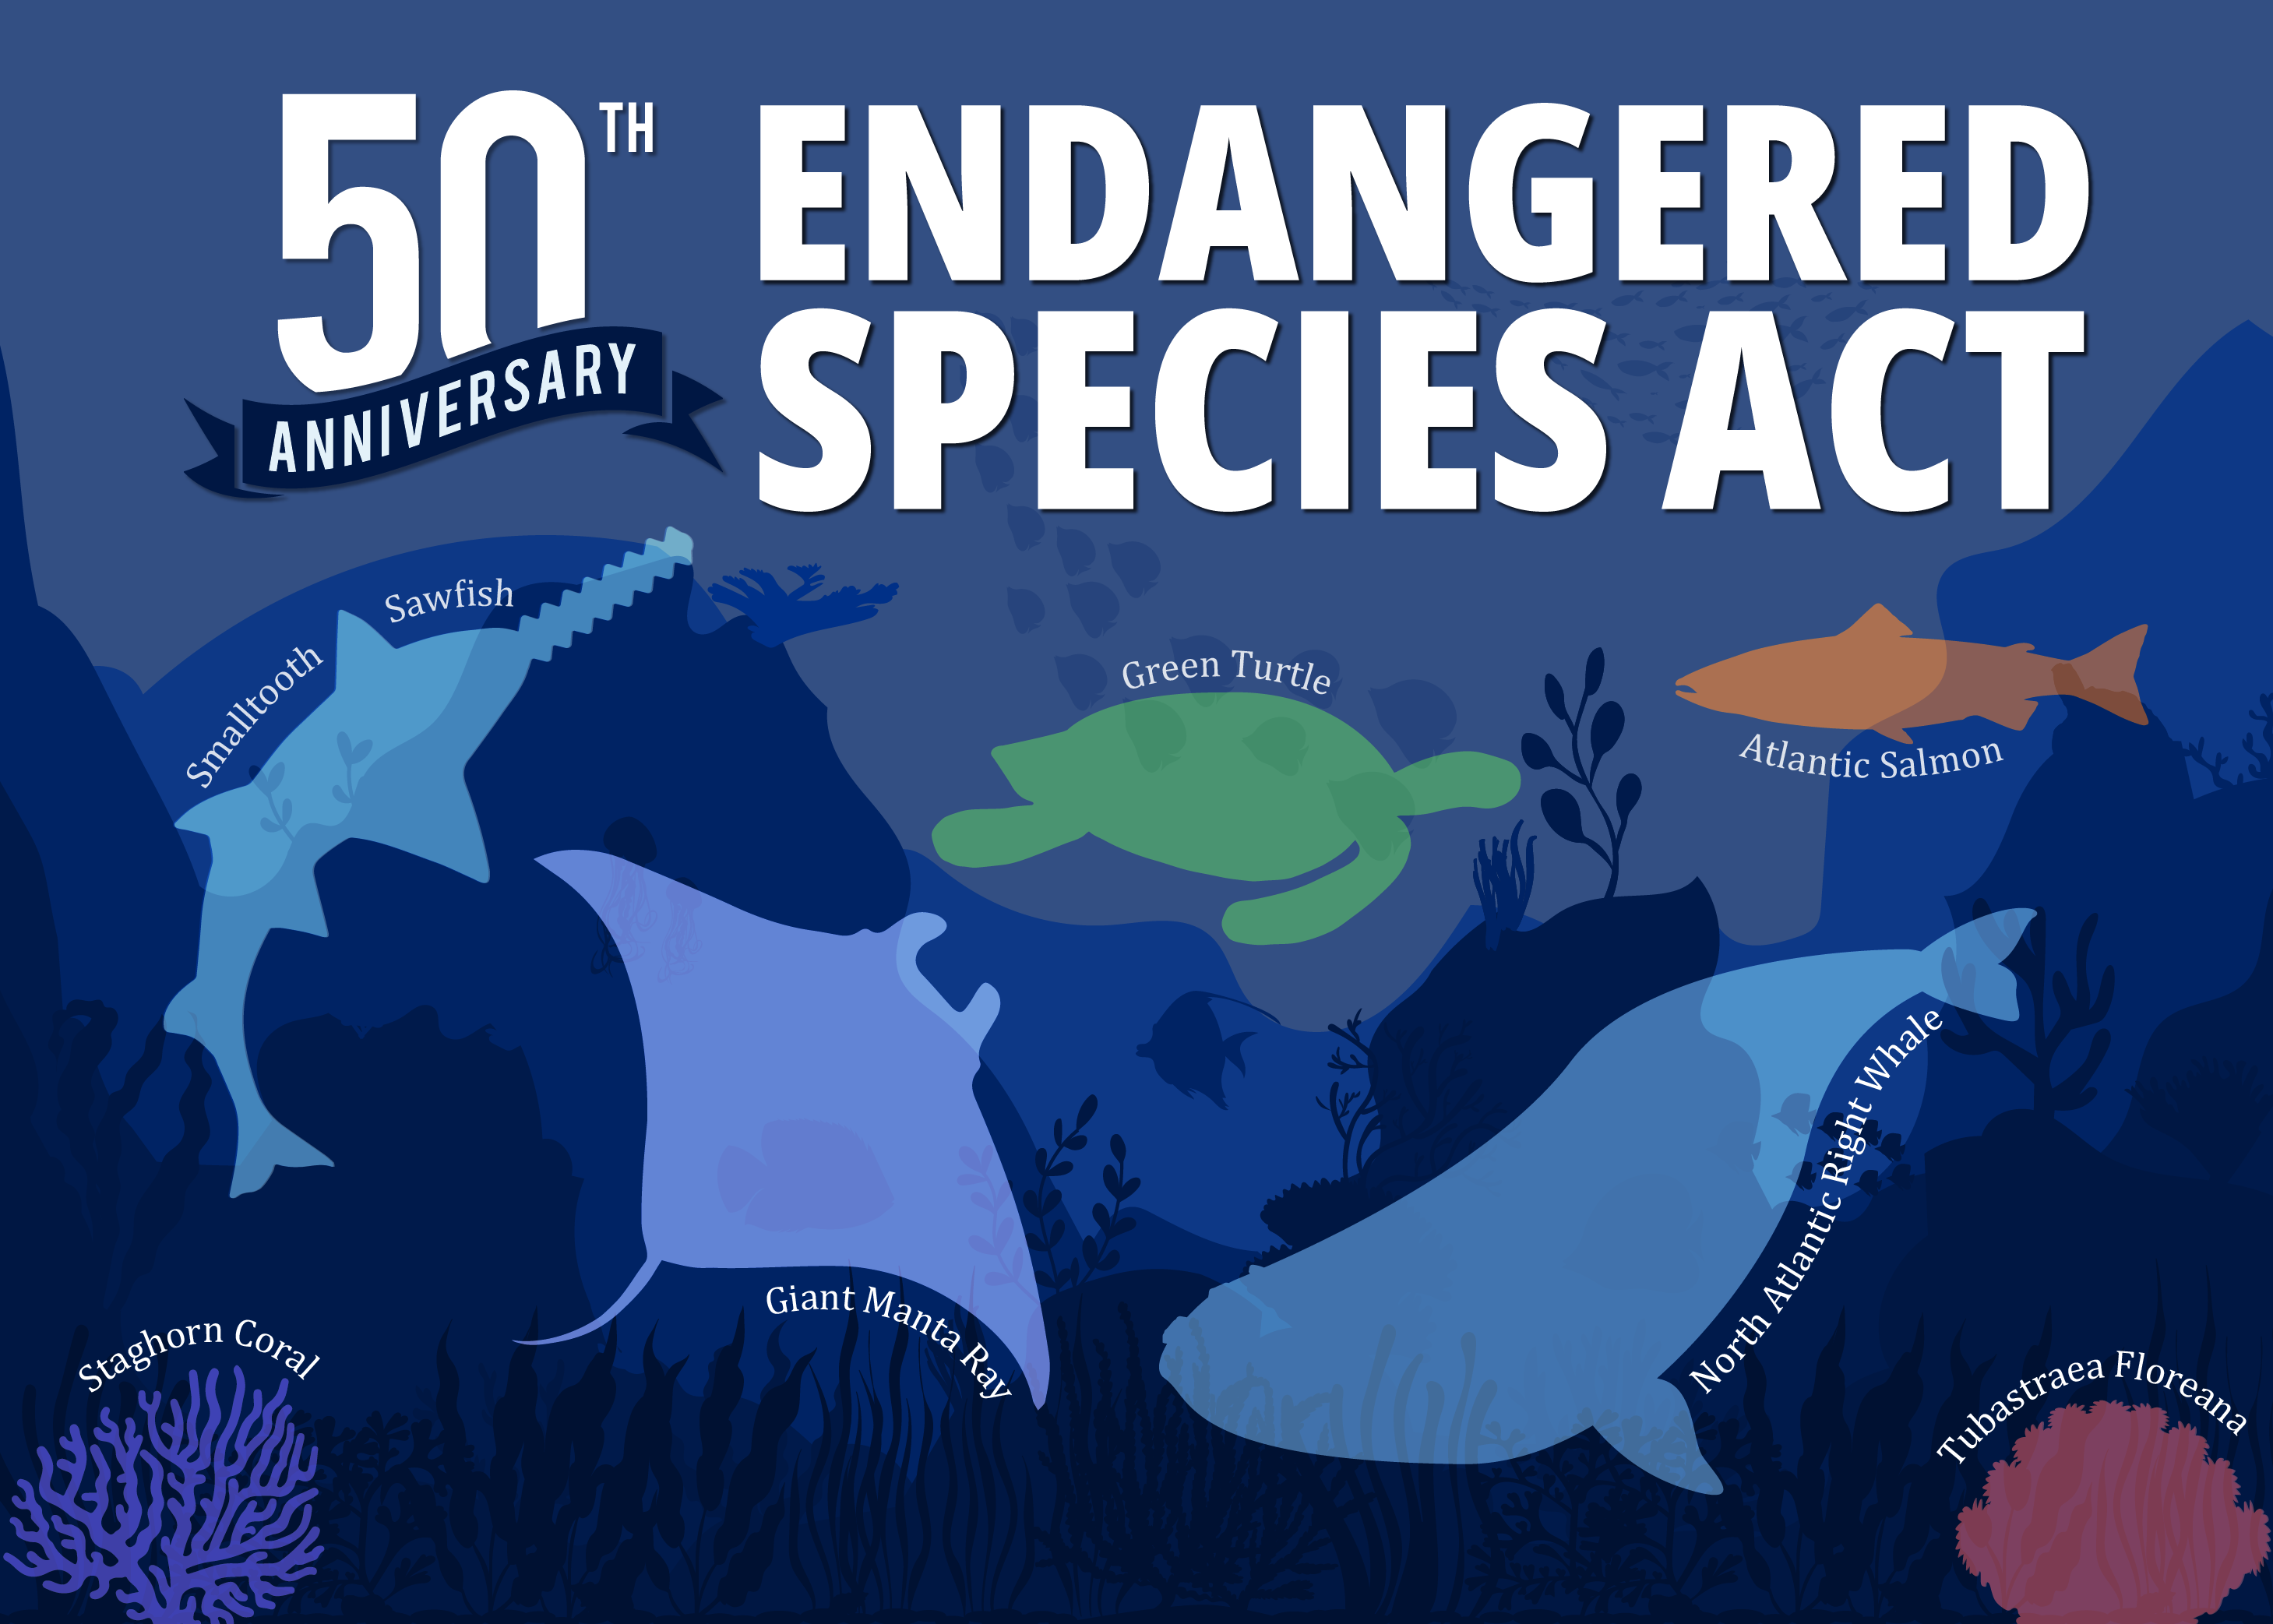 most endangered animals in the world